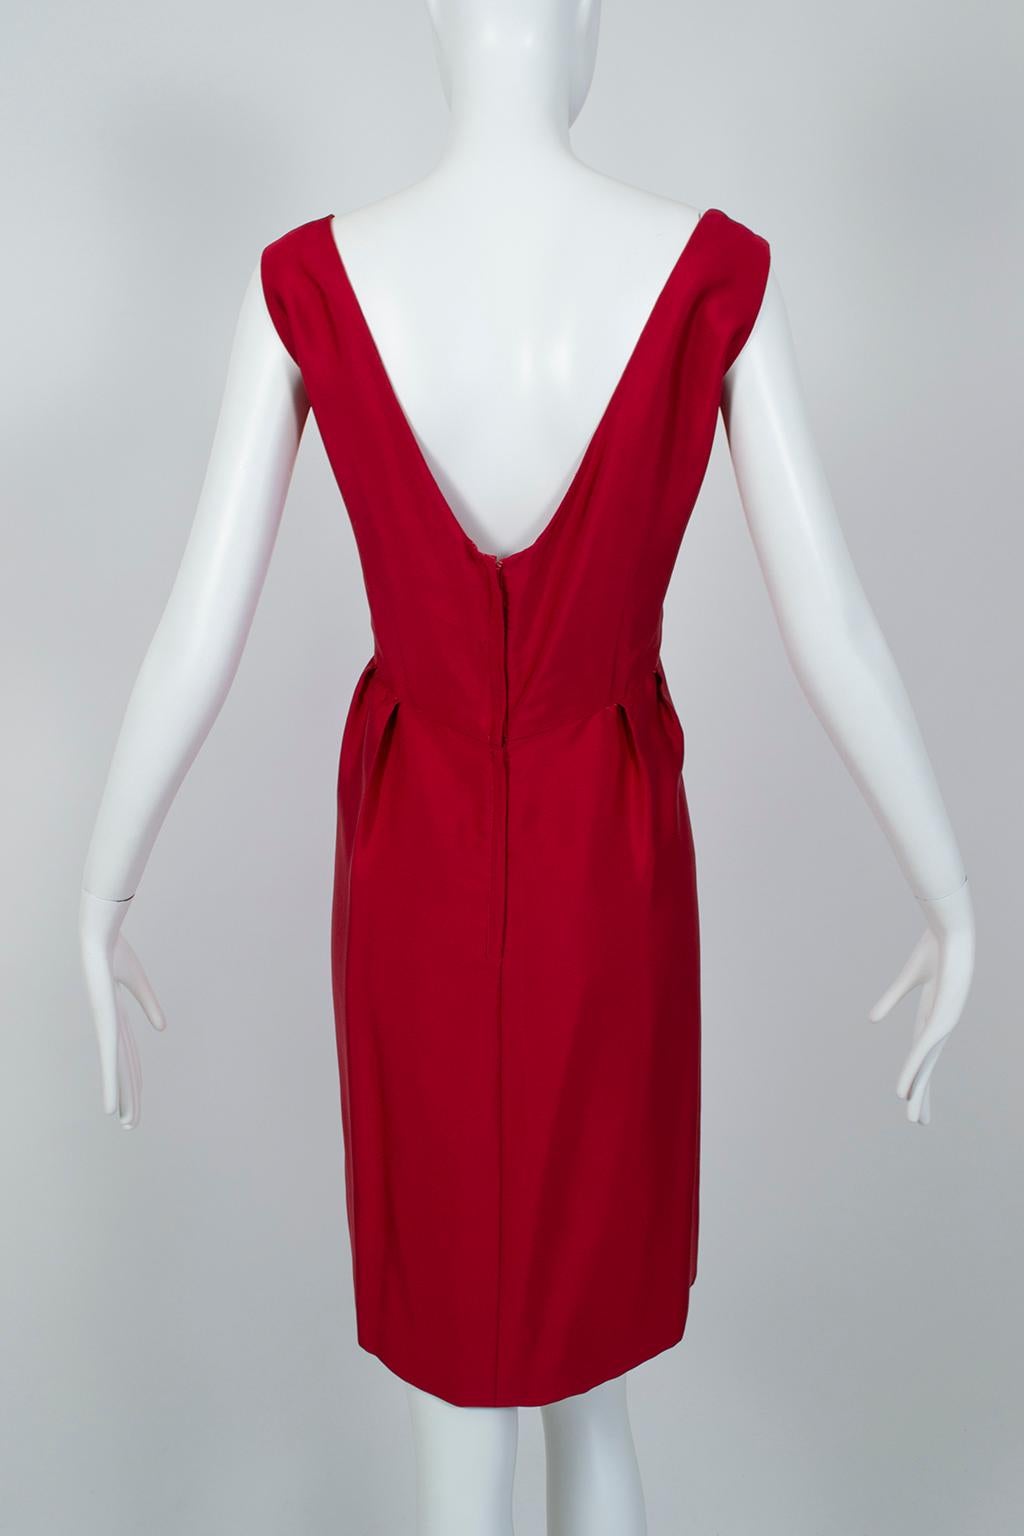 Lipstick Red Silk *Larger Size* Sheath Dress w Convertible Scarf Back - L, 1960s In Excellent Condition For Sale In Tucson, AZ